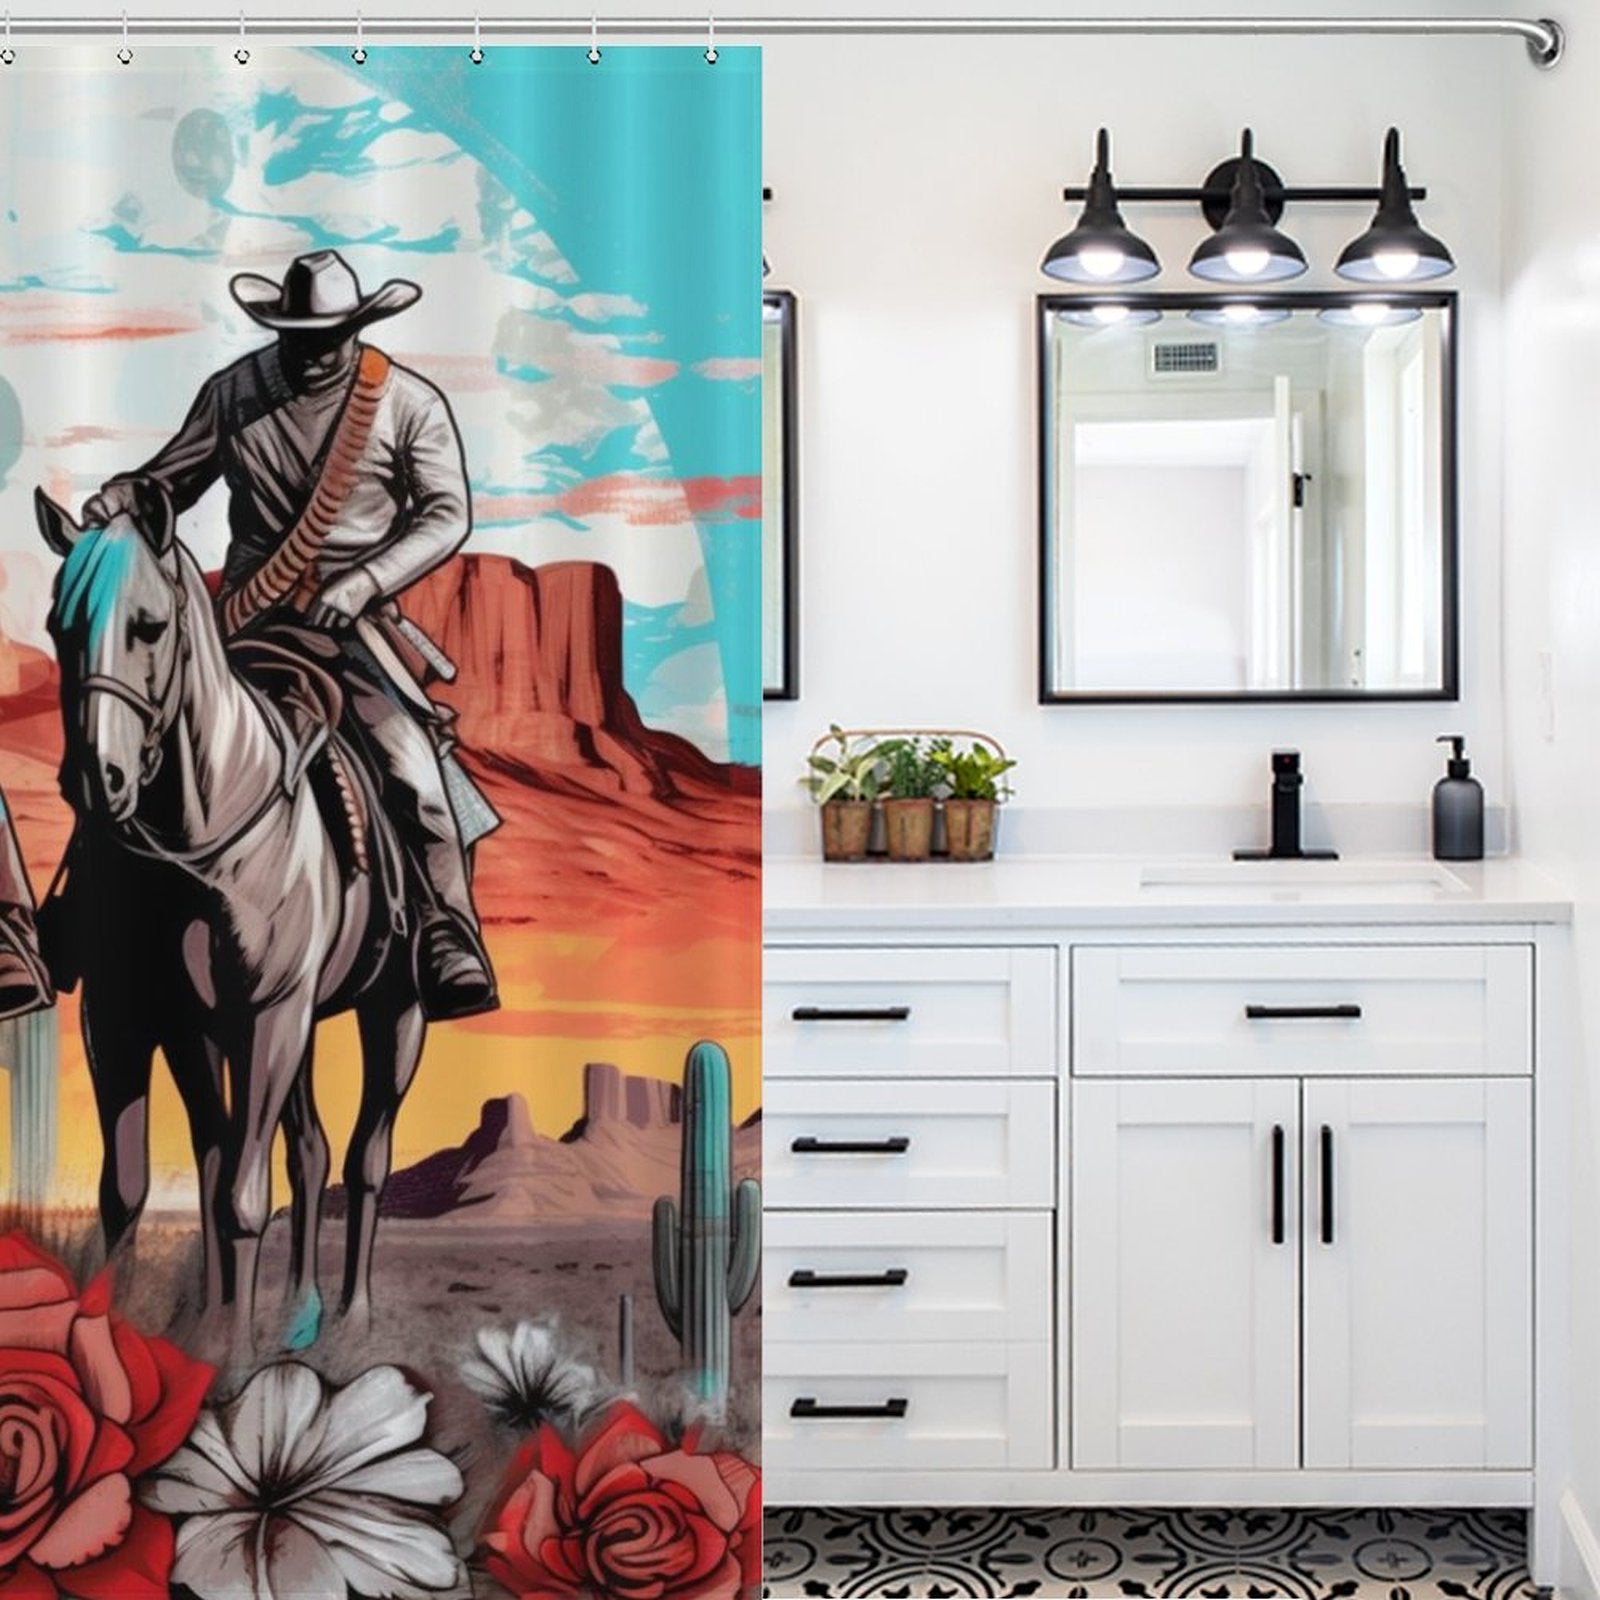 A Western-themed bathroom features a white vanity, a black framed mirror, and a Cotton Cat Cowboy Riding Horses Western Shower Curtain-Cottoncat with a cowboy riding horses against desert scenery.